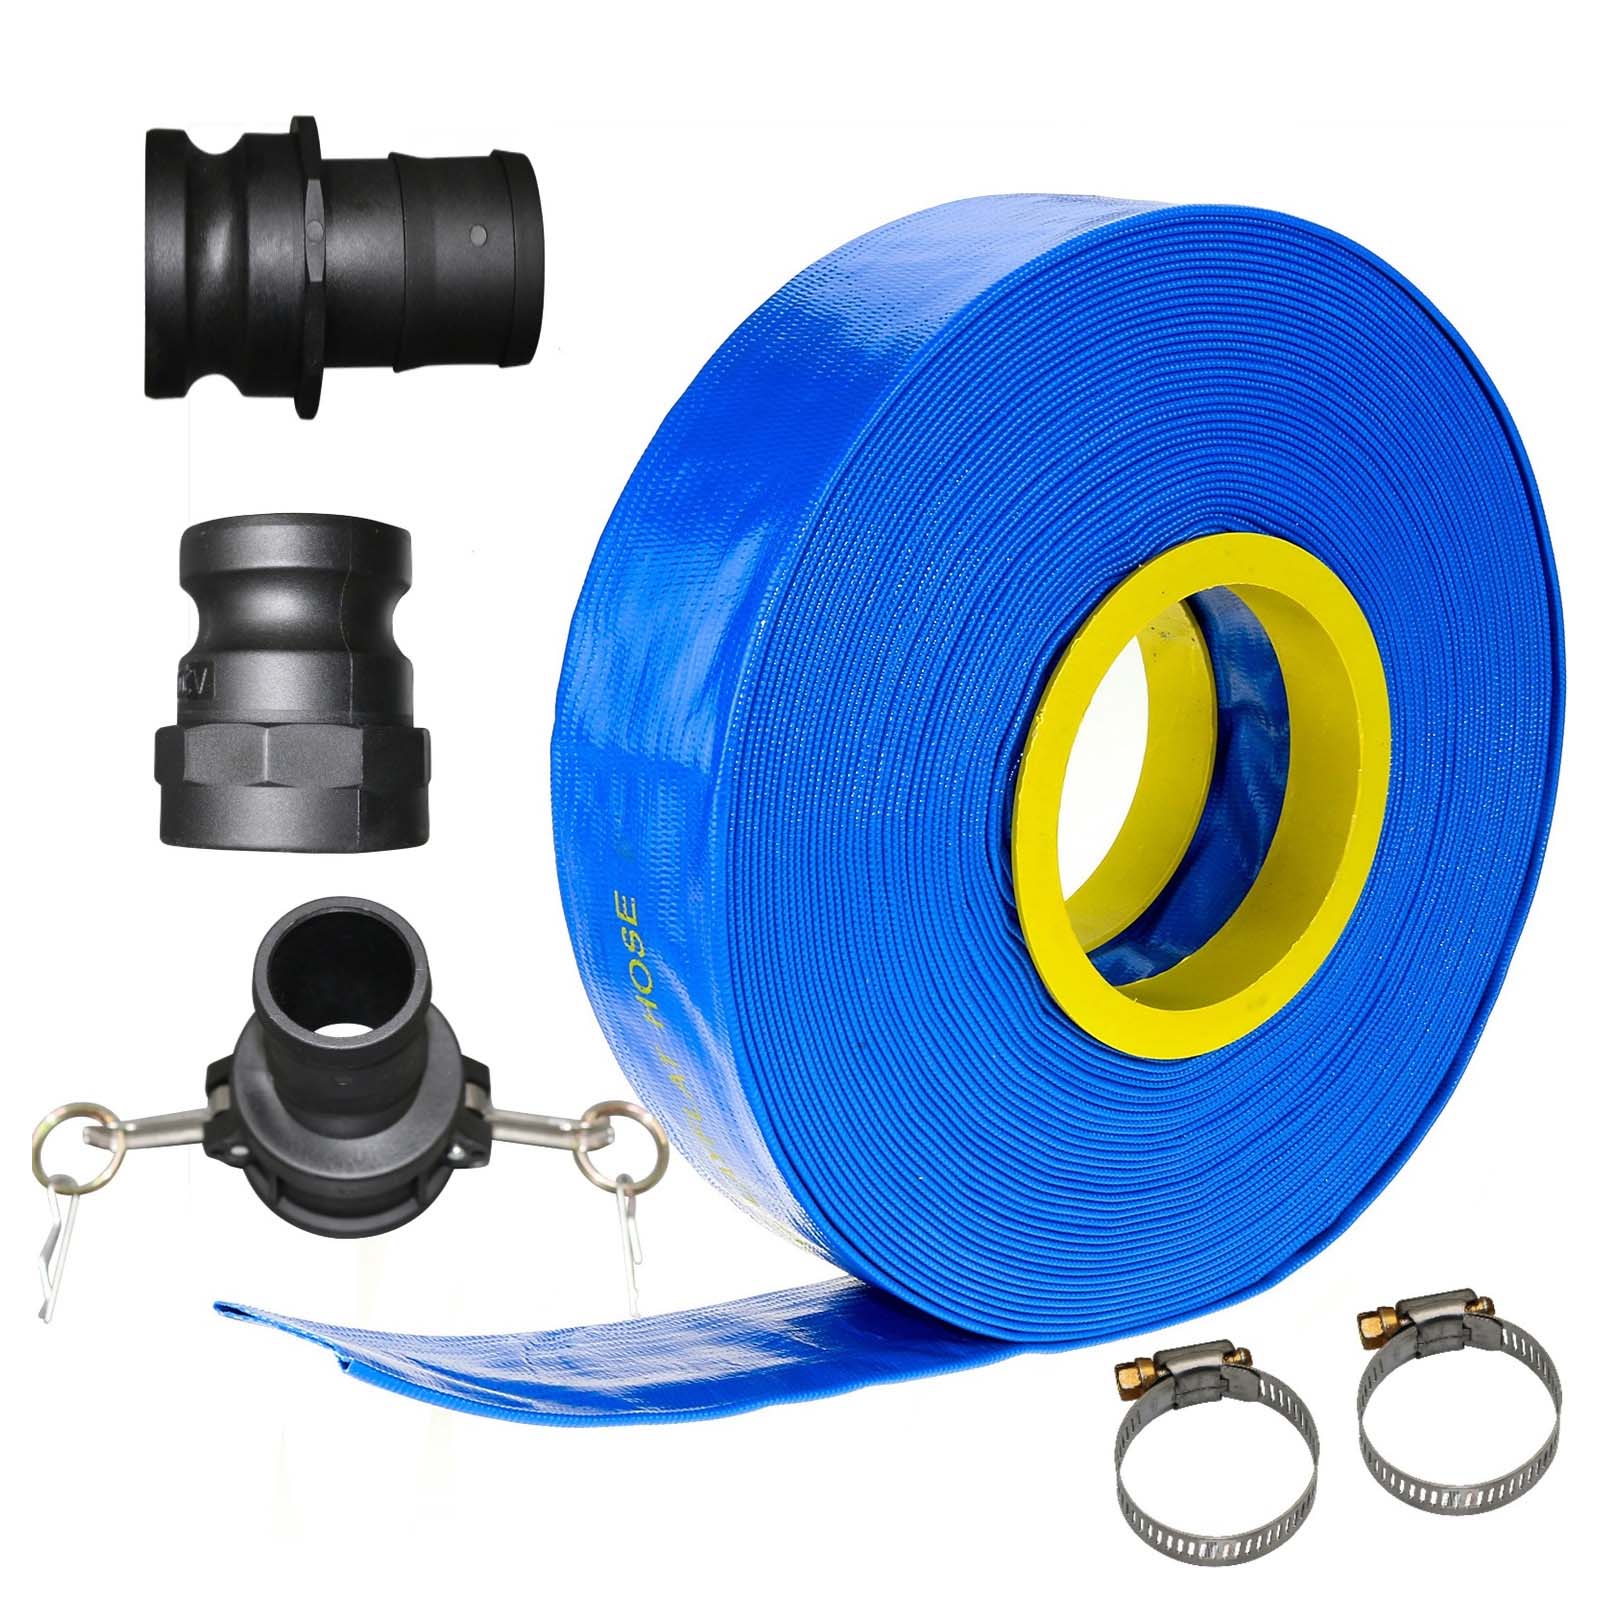 30m x 3 76mm ID Outlet Layflat Hose Kit Camlock Clamps Water Transfer Pump  - JONO & JOHNO